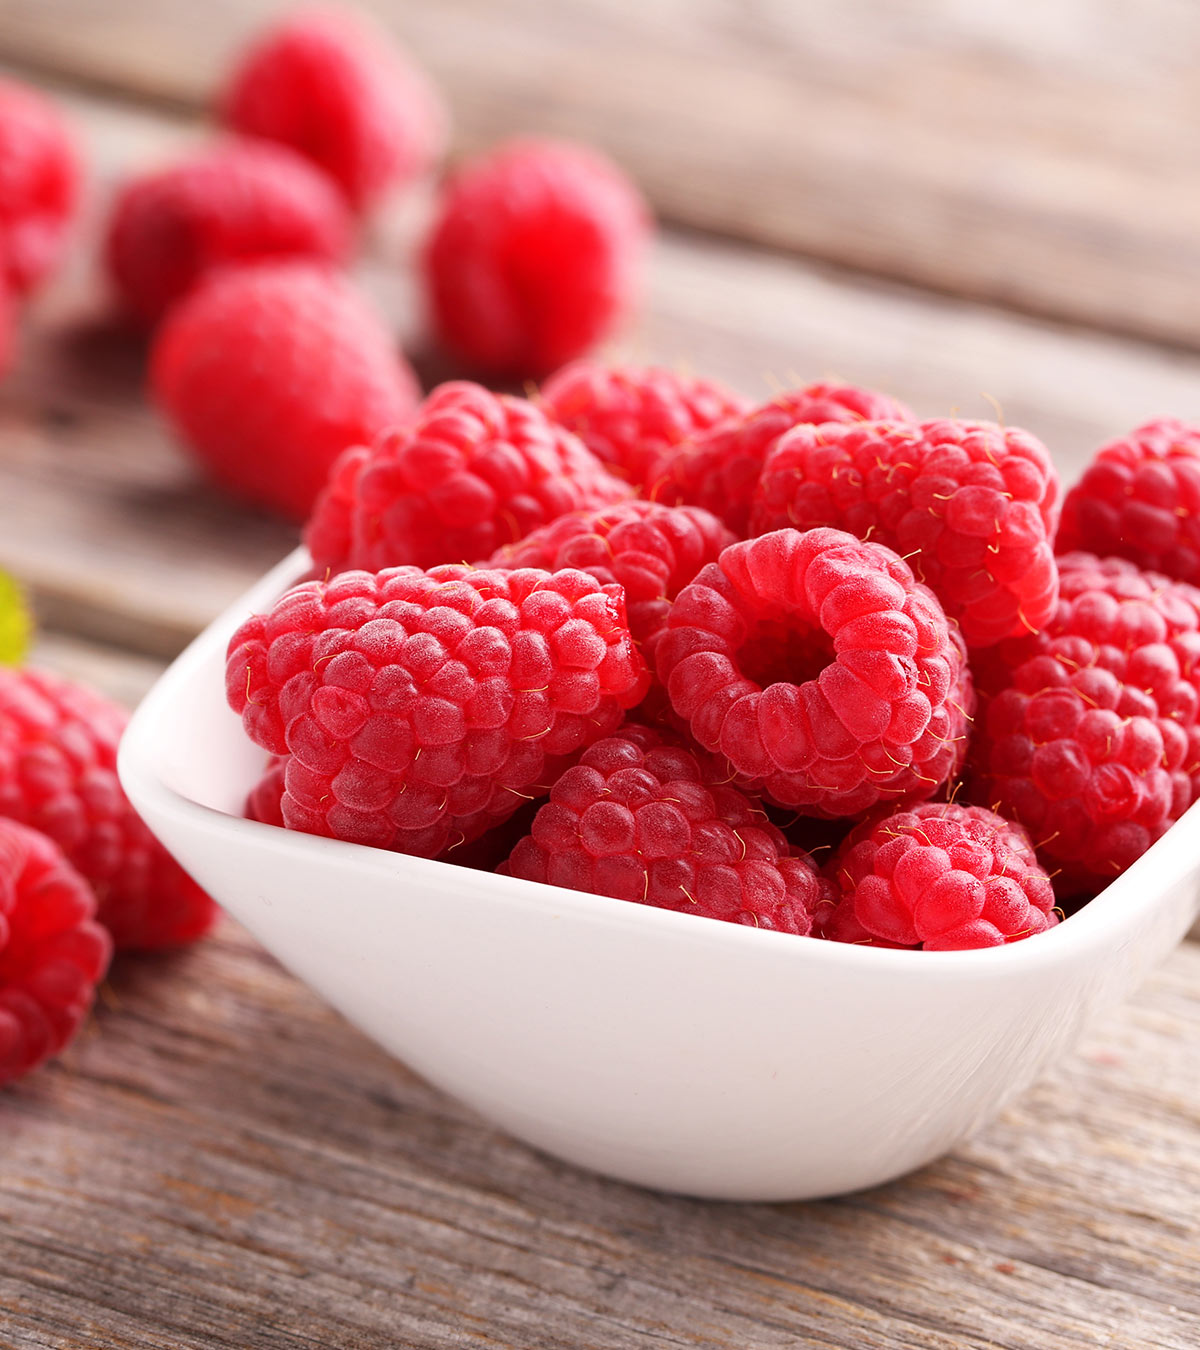 Can You Eat Raspberries When Pregnant?